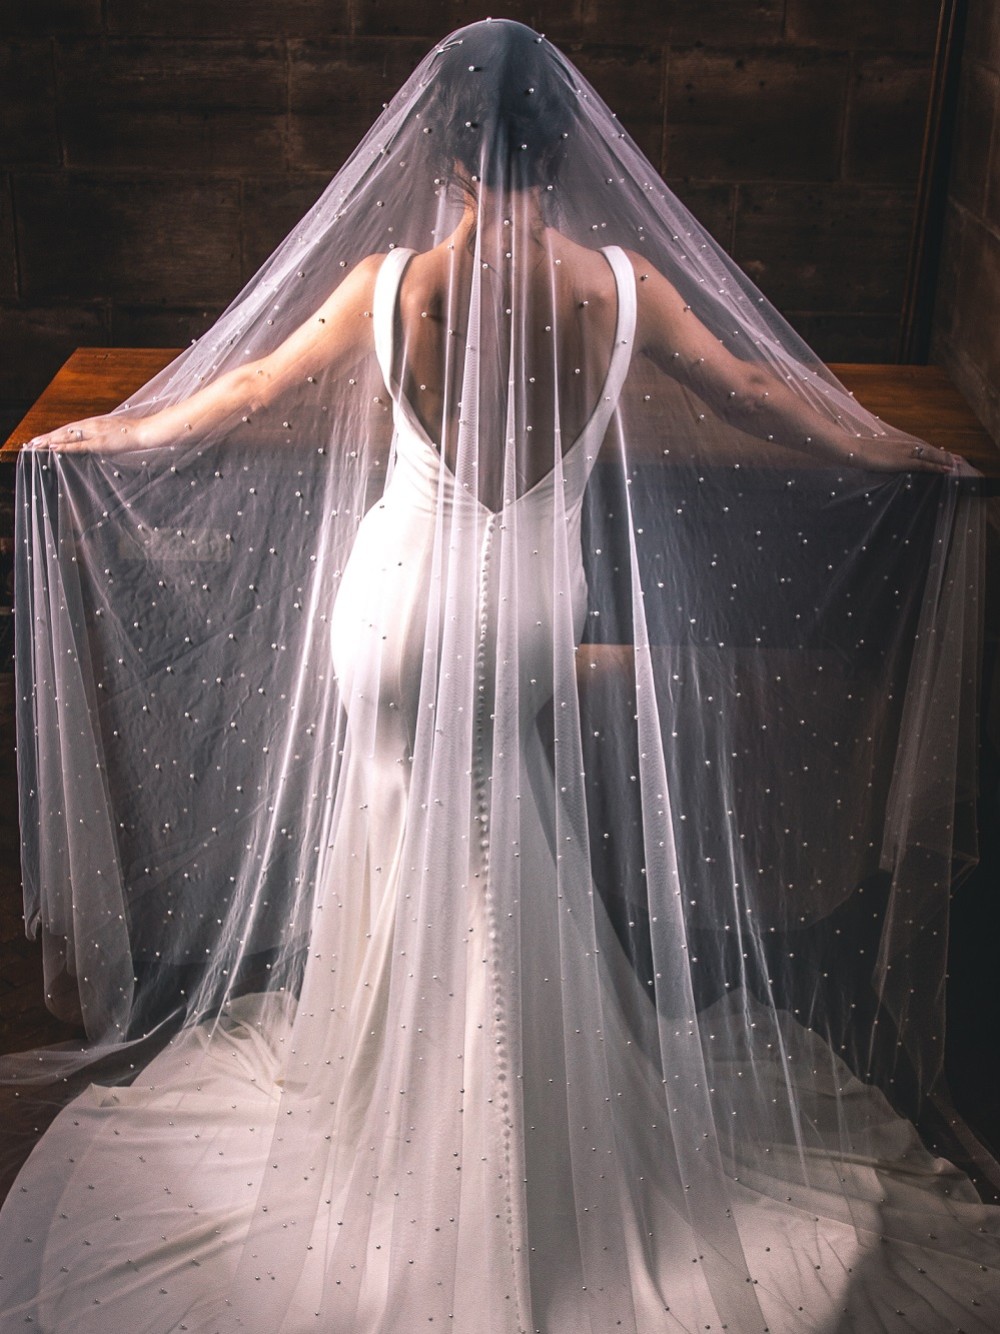 Photograph: Perfect Bridal Ivory Two Tier Heavily Embellished Pearl Veil